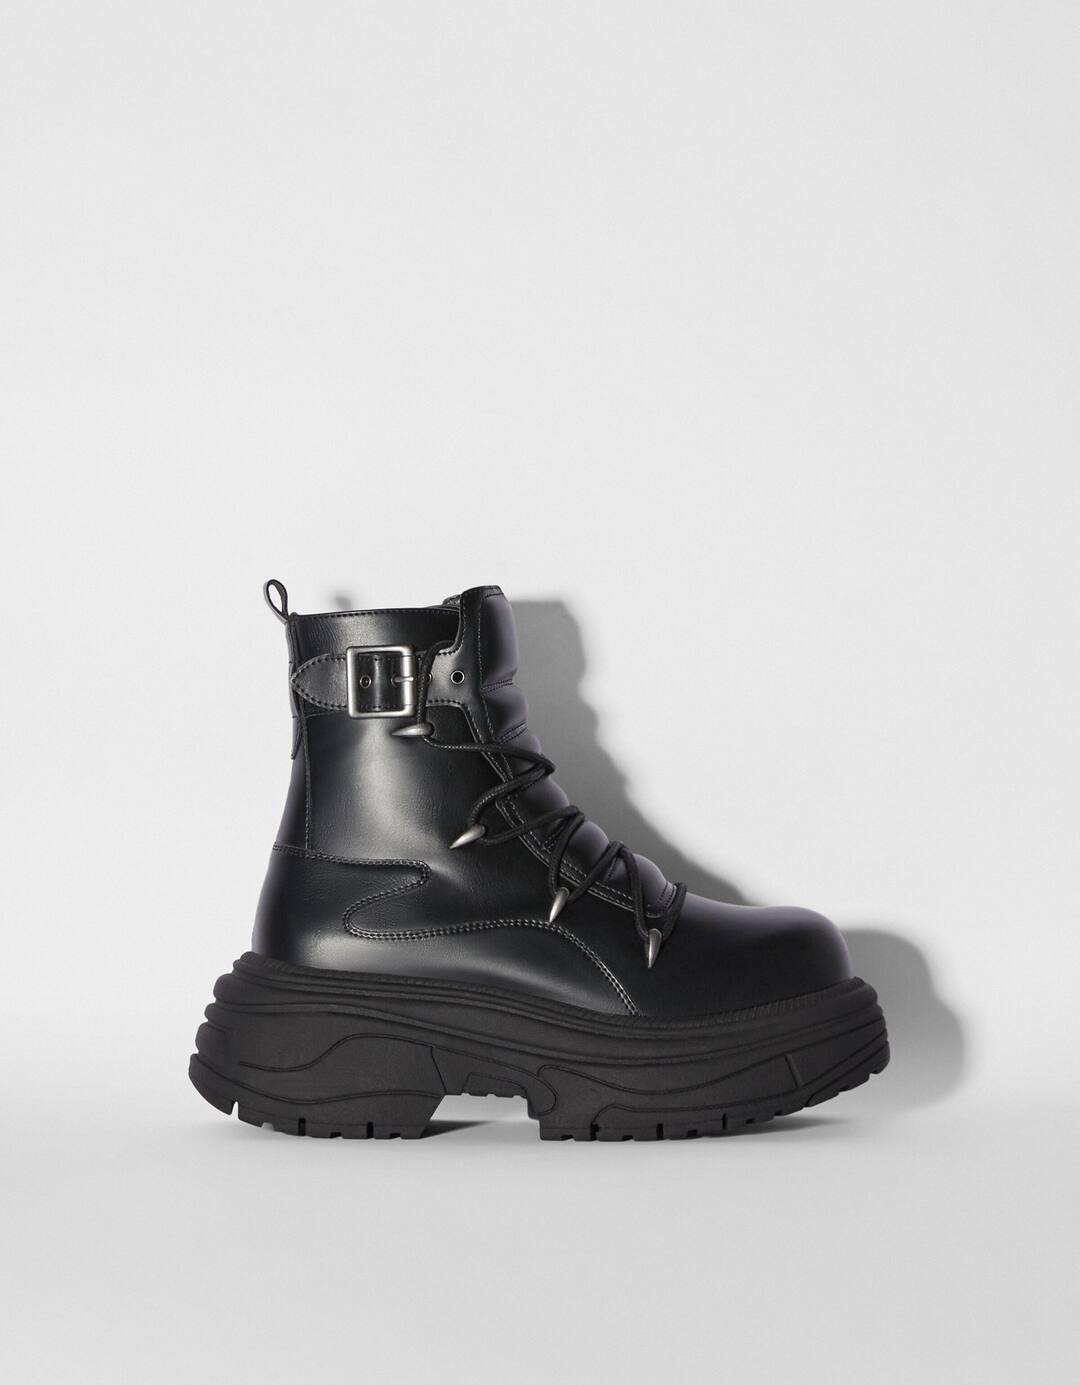 Men's chunky boots with buckles